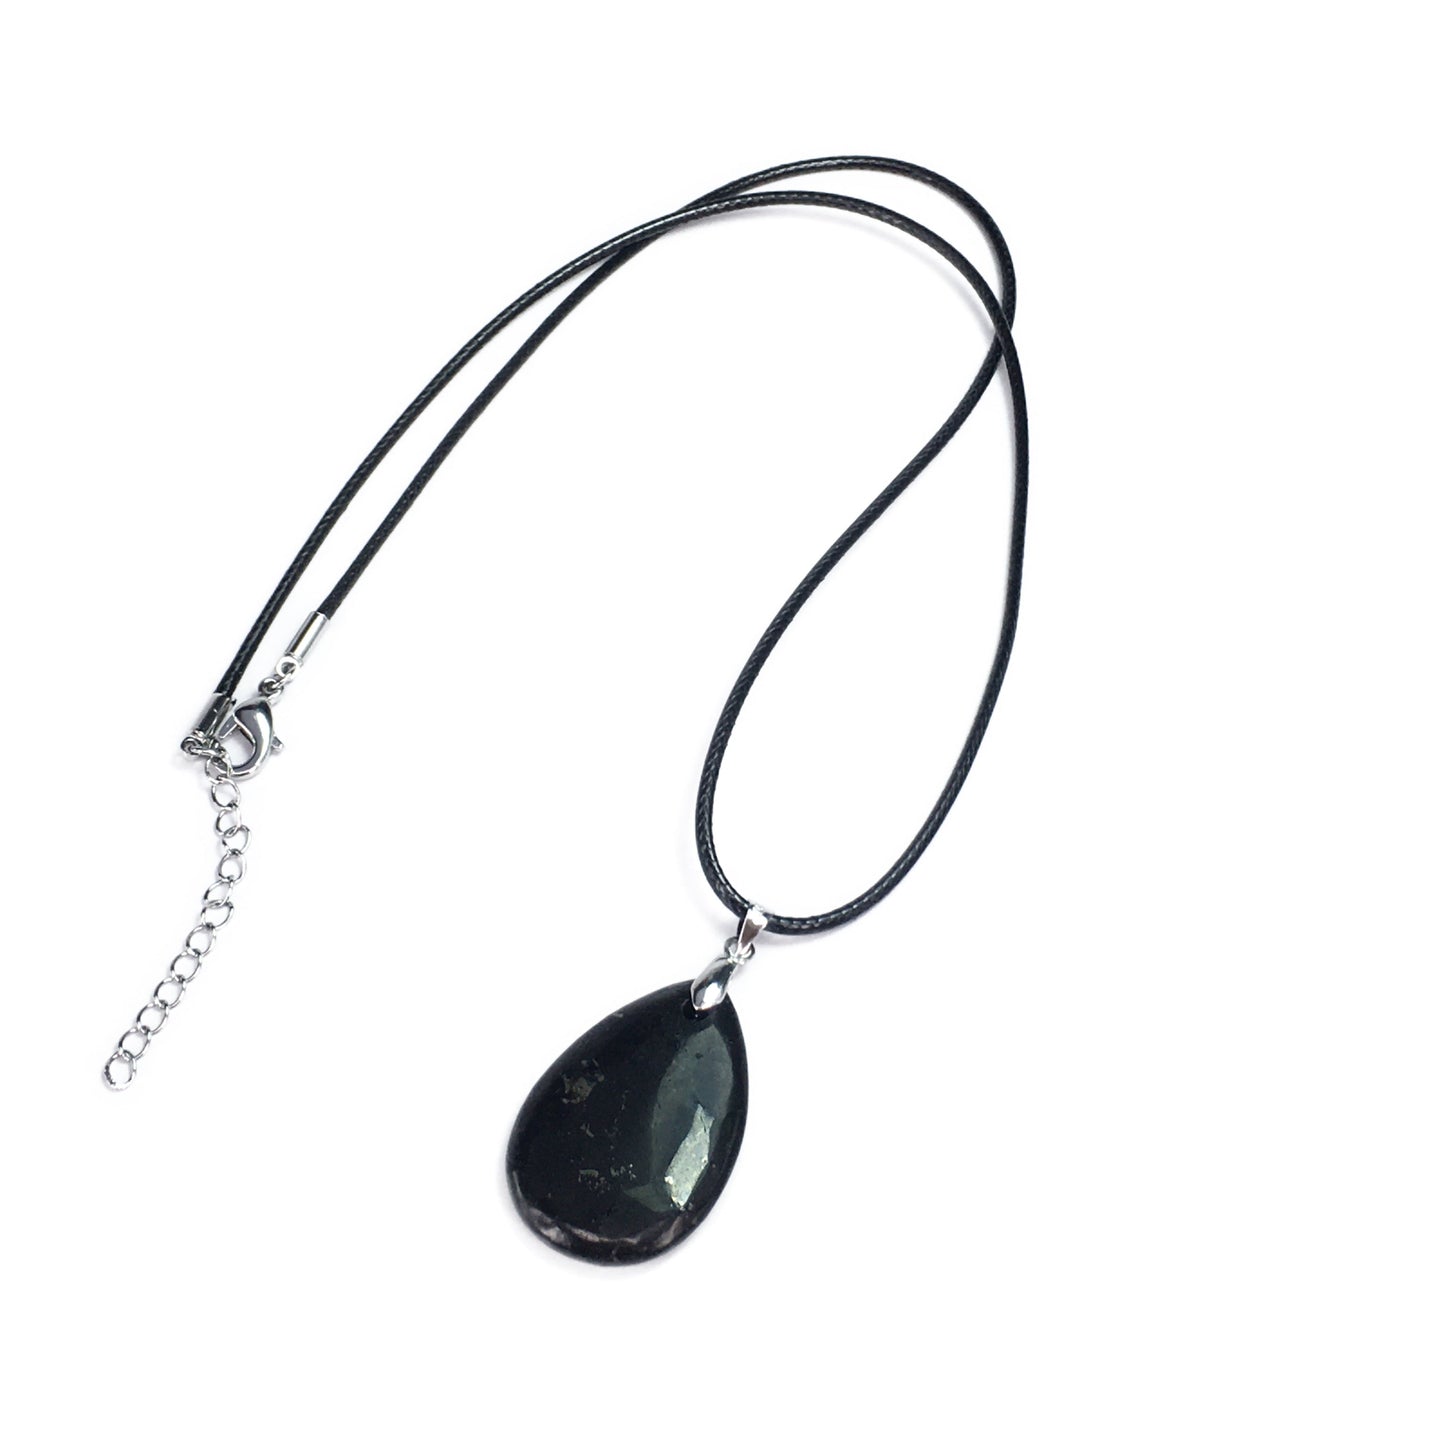 Shungite Pear Shape Pendant 20X30mm With Leather Cord Necklace